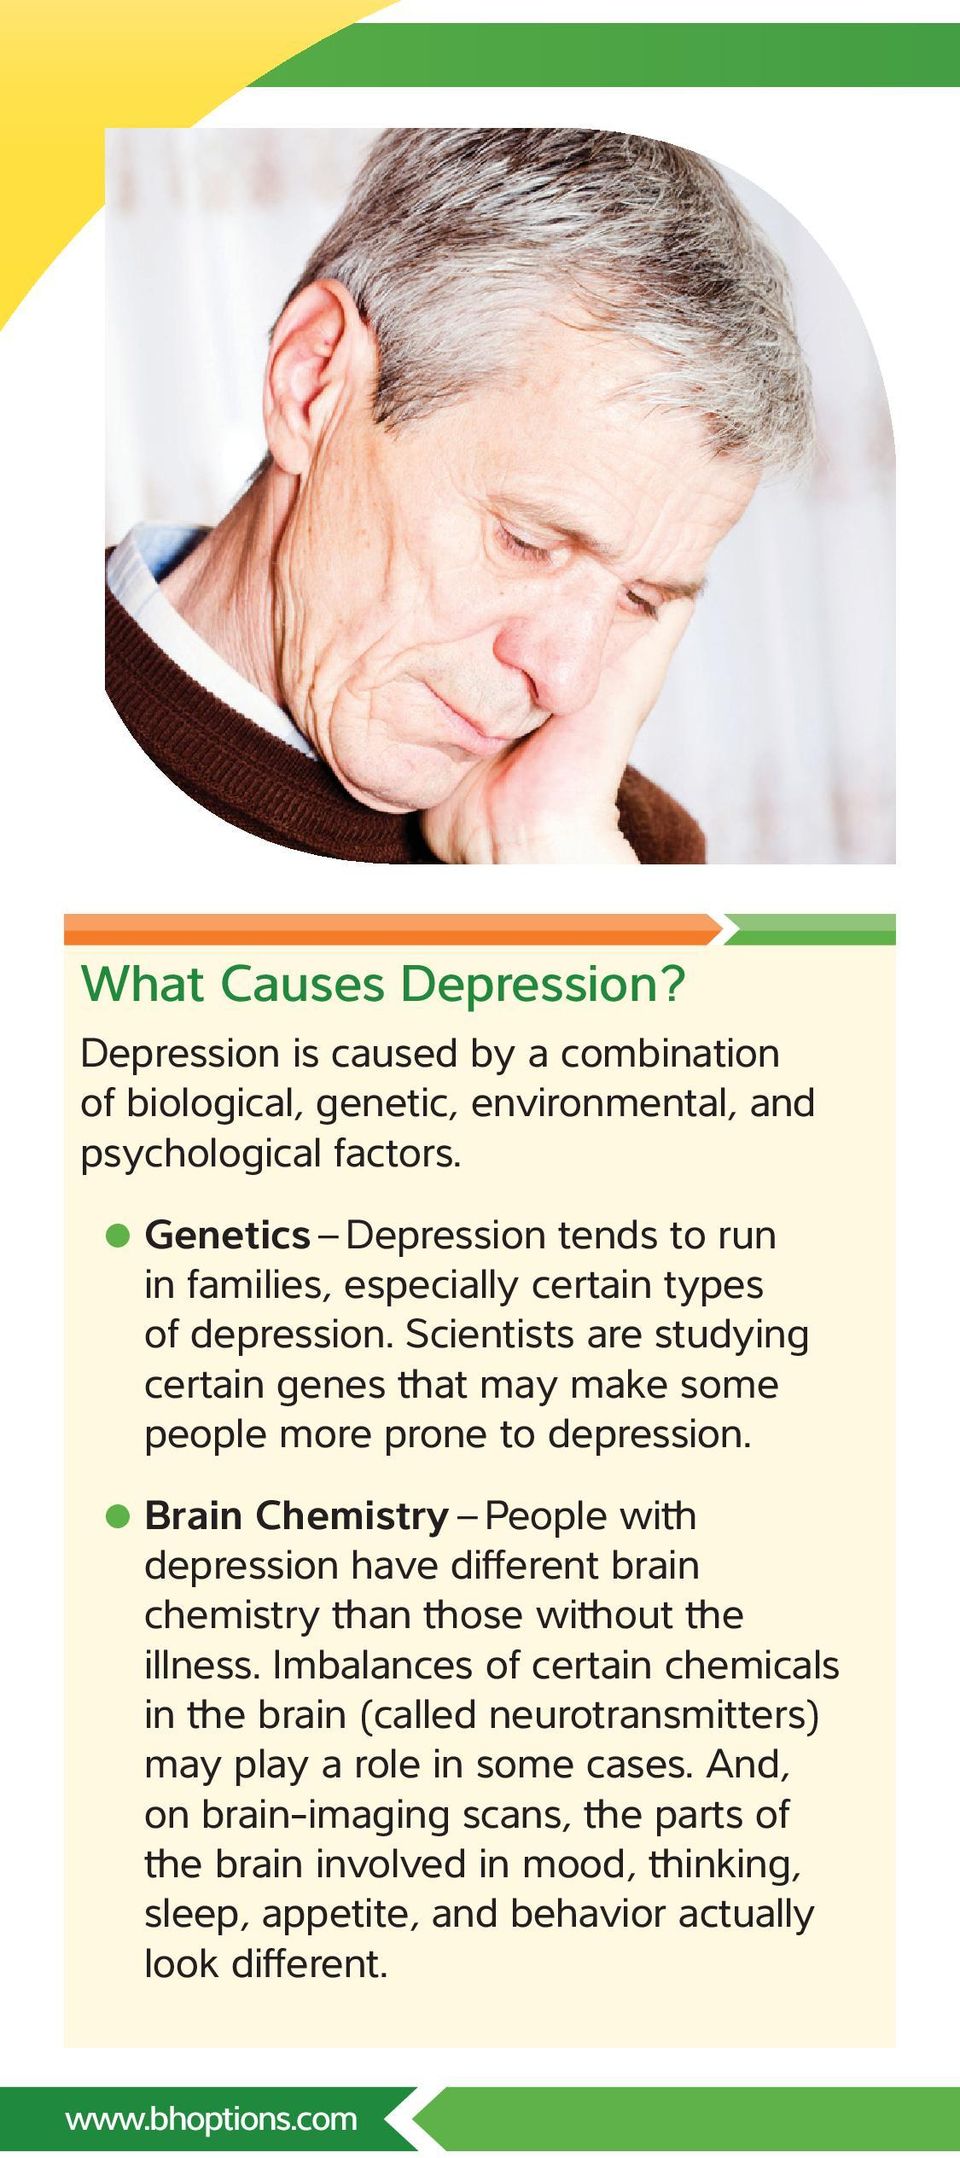 Scientists are studying certain genes that may make some people more prone to depression.